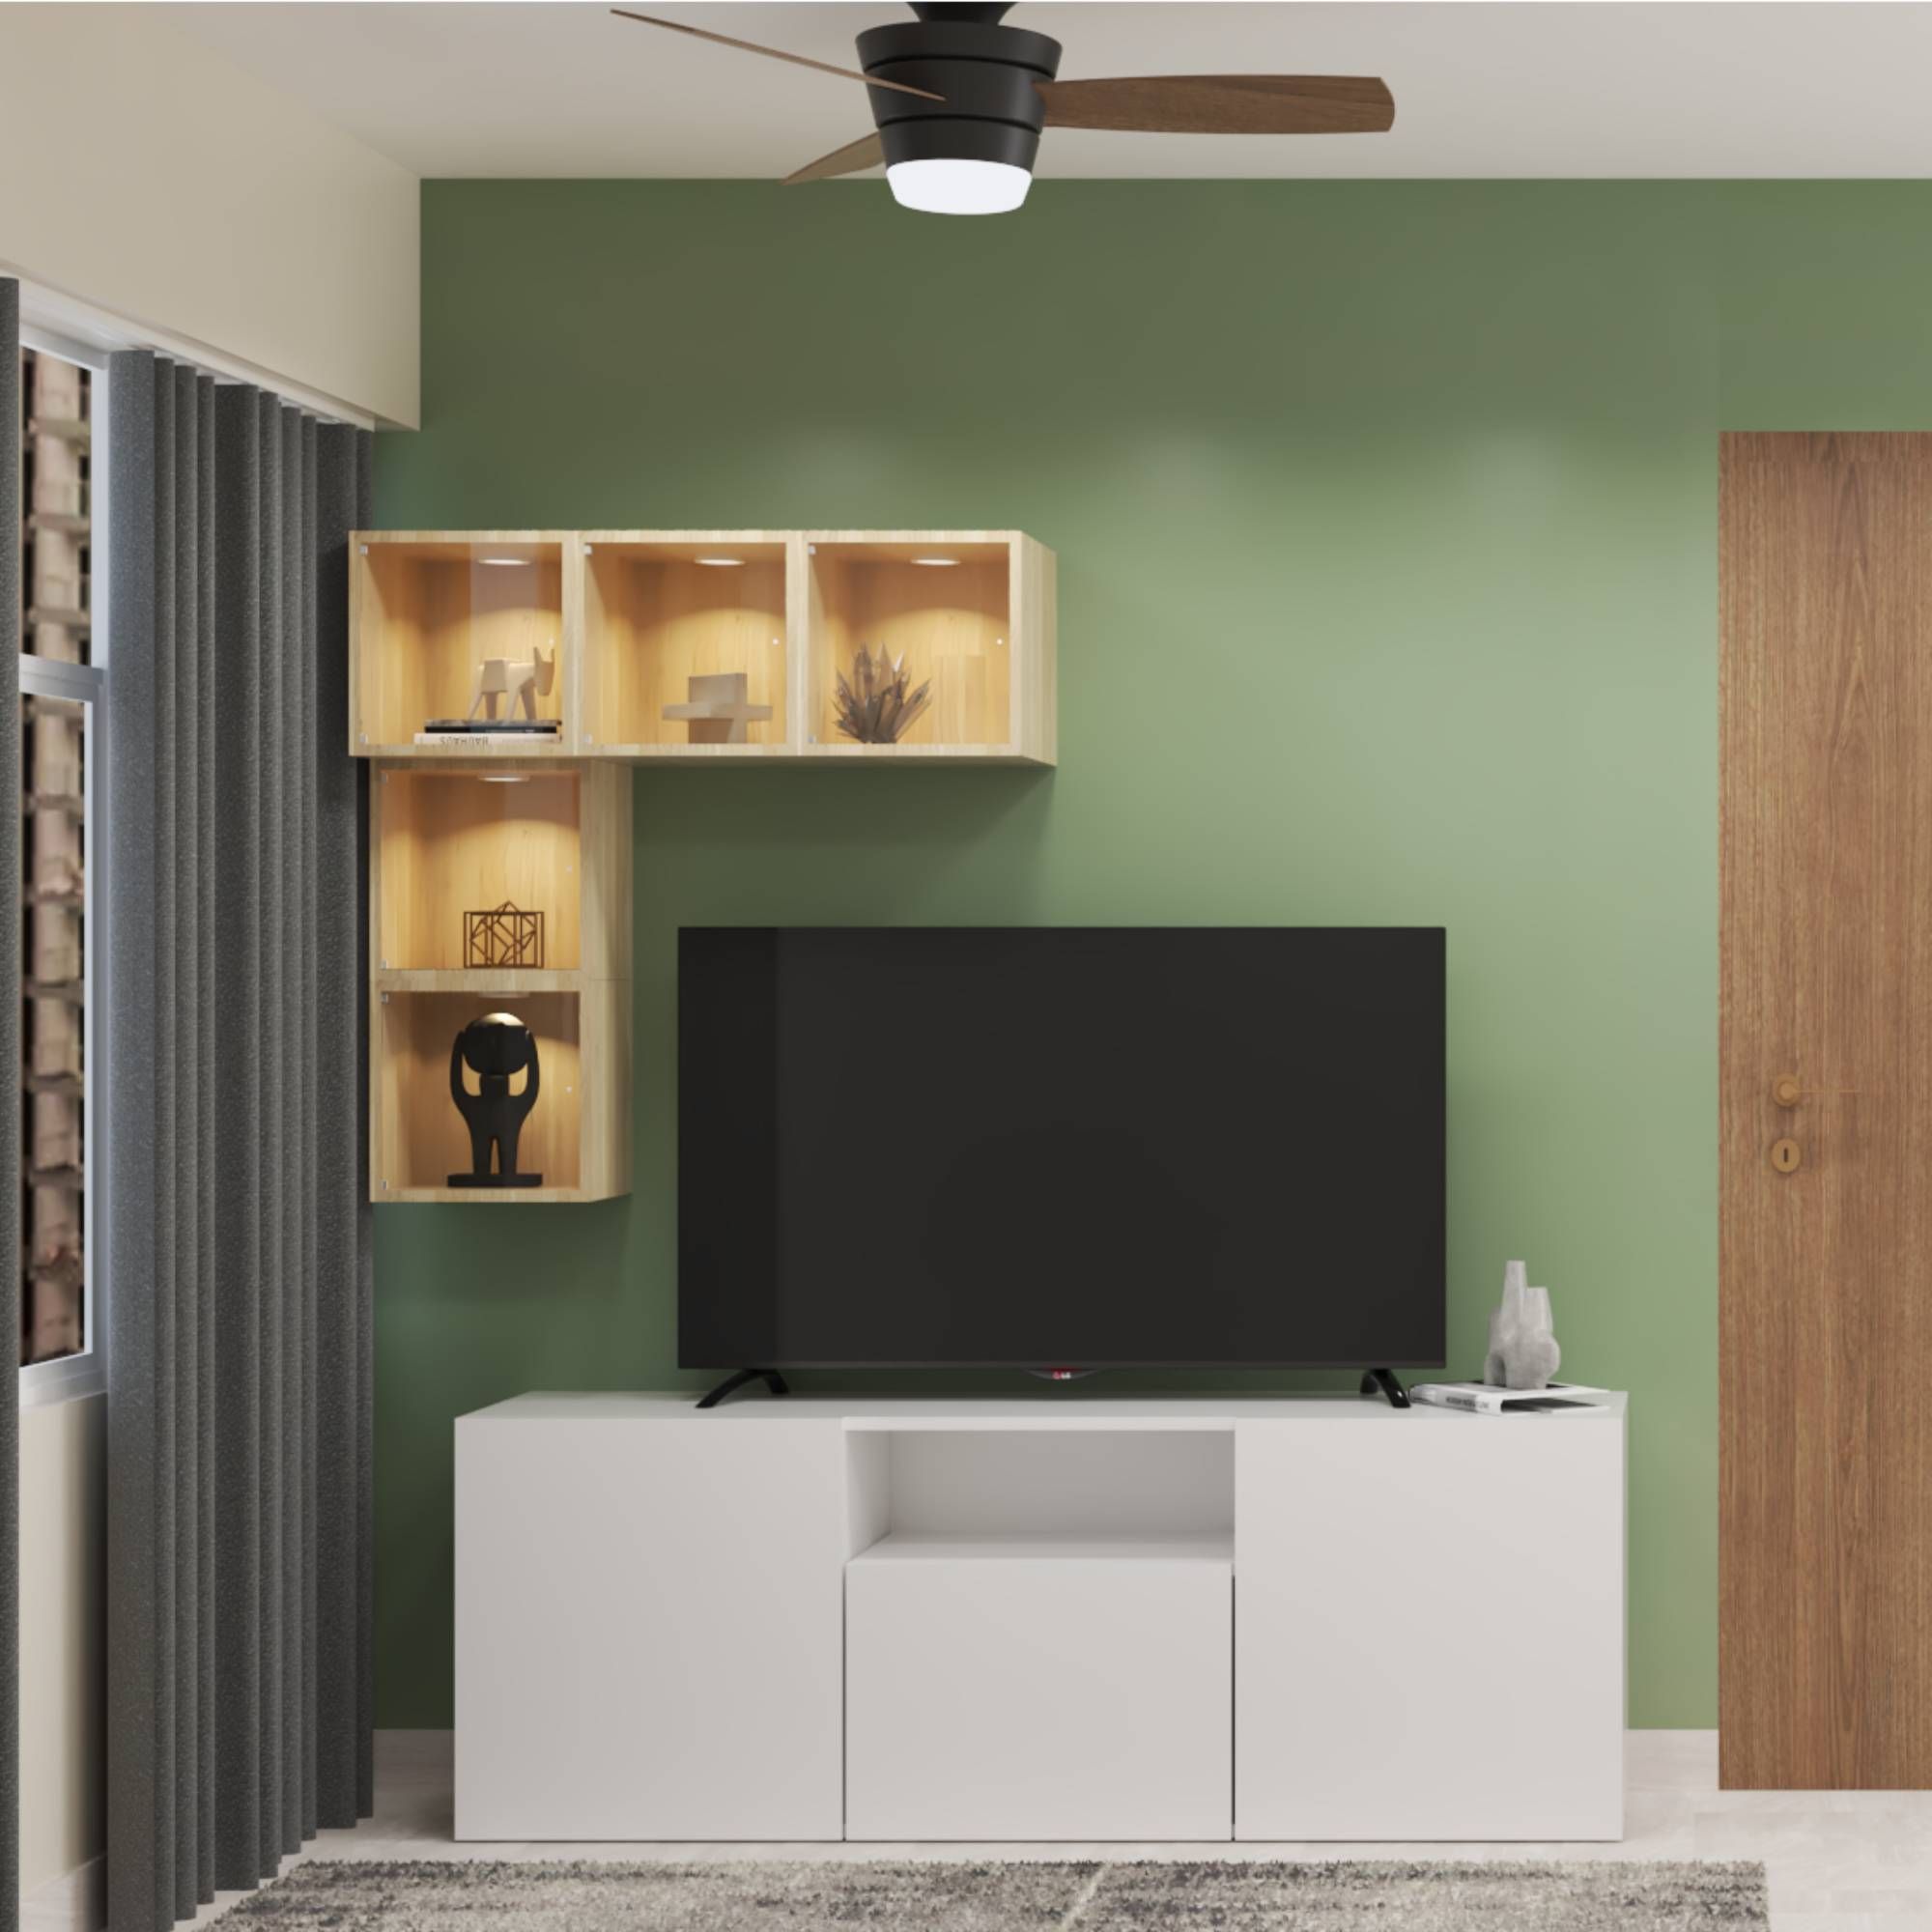 Contemporary TV Cabinet With An L-Shaped Wall Unit